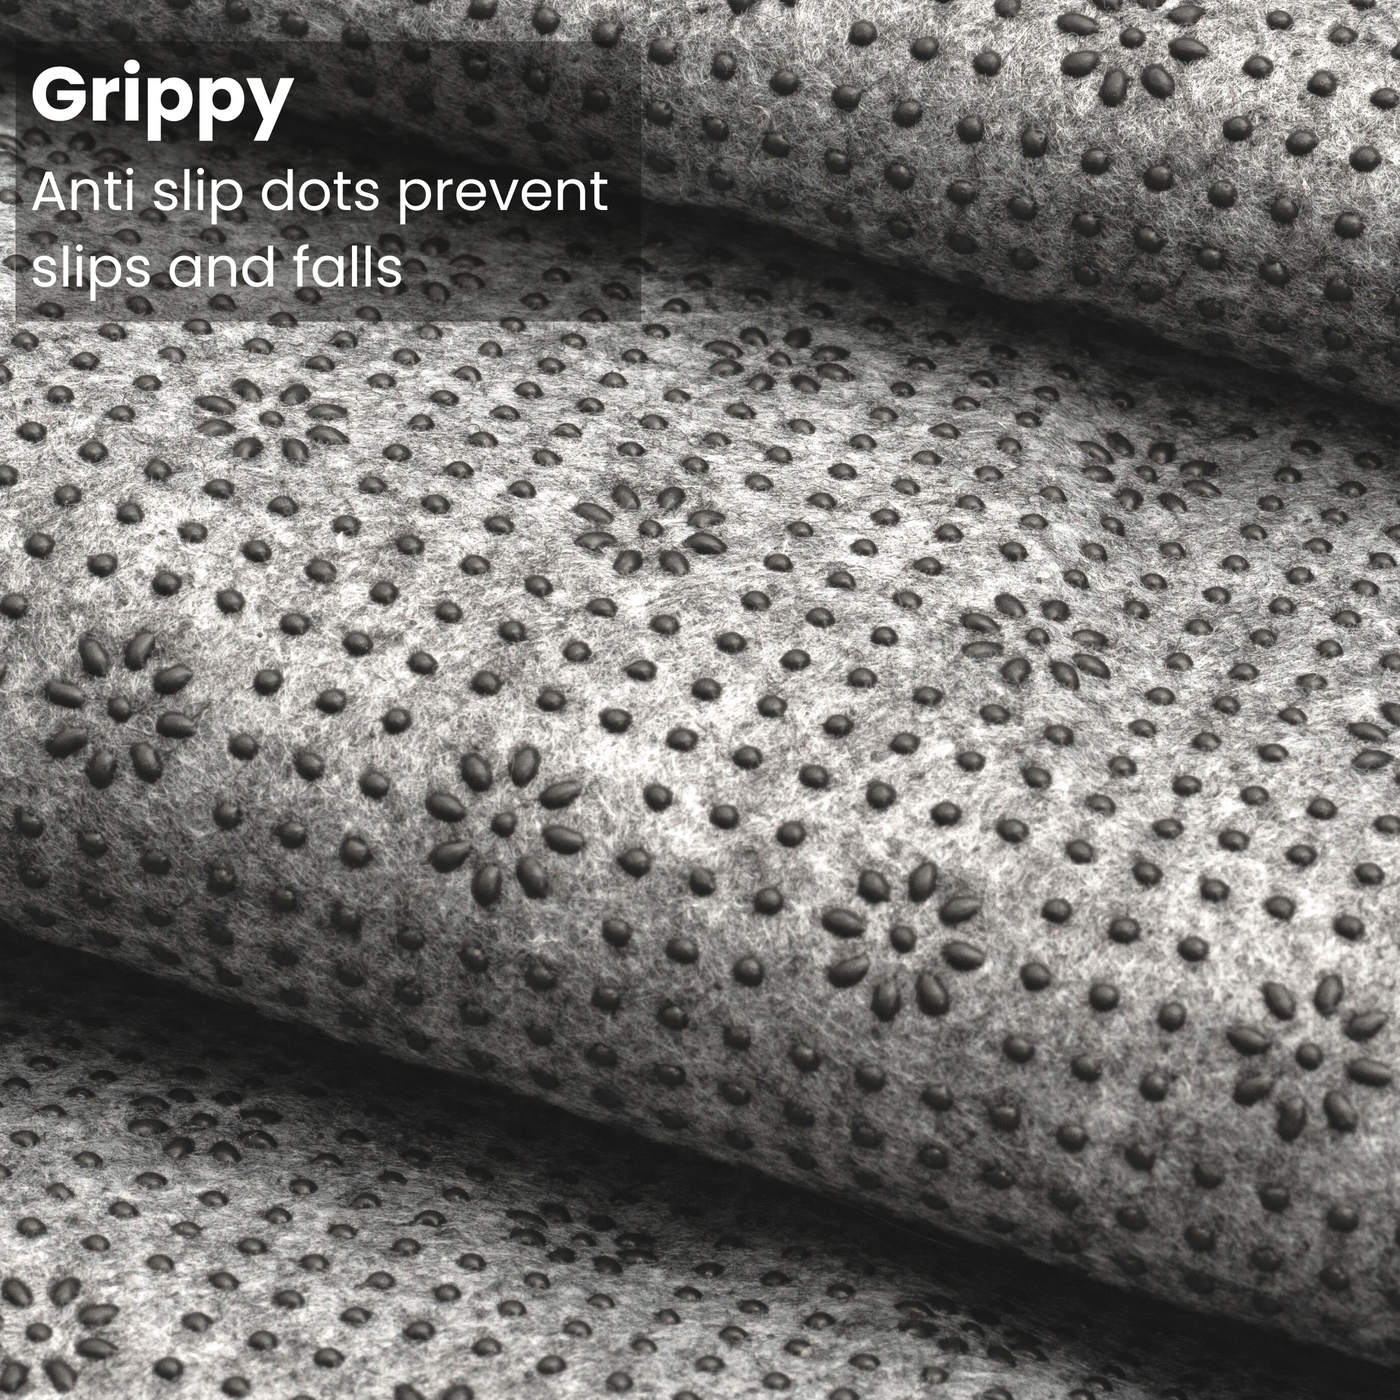 Backing Rug Fabric for Tufting with Grippy Non Slip Rubber Dots – Dabline